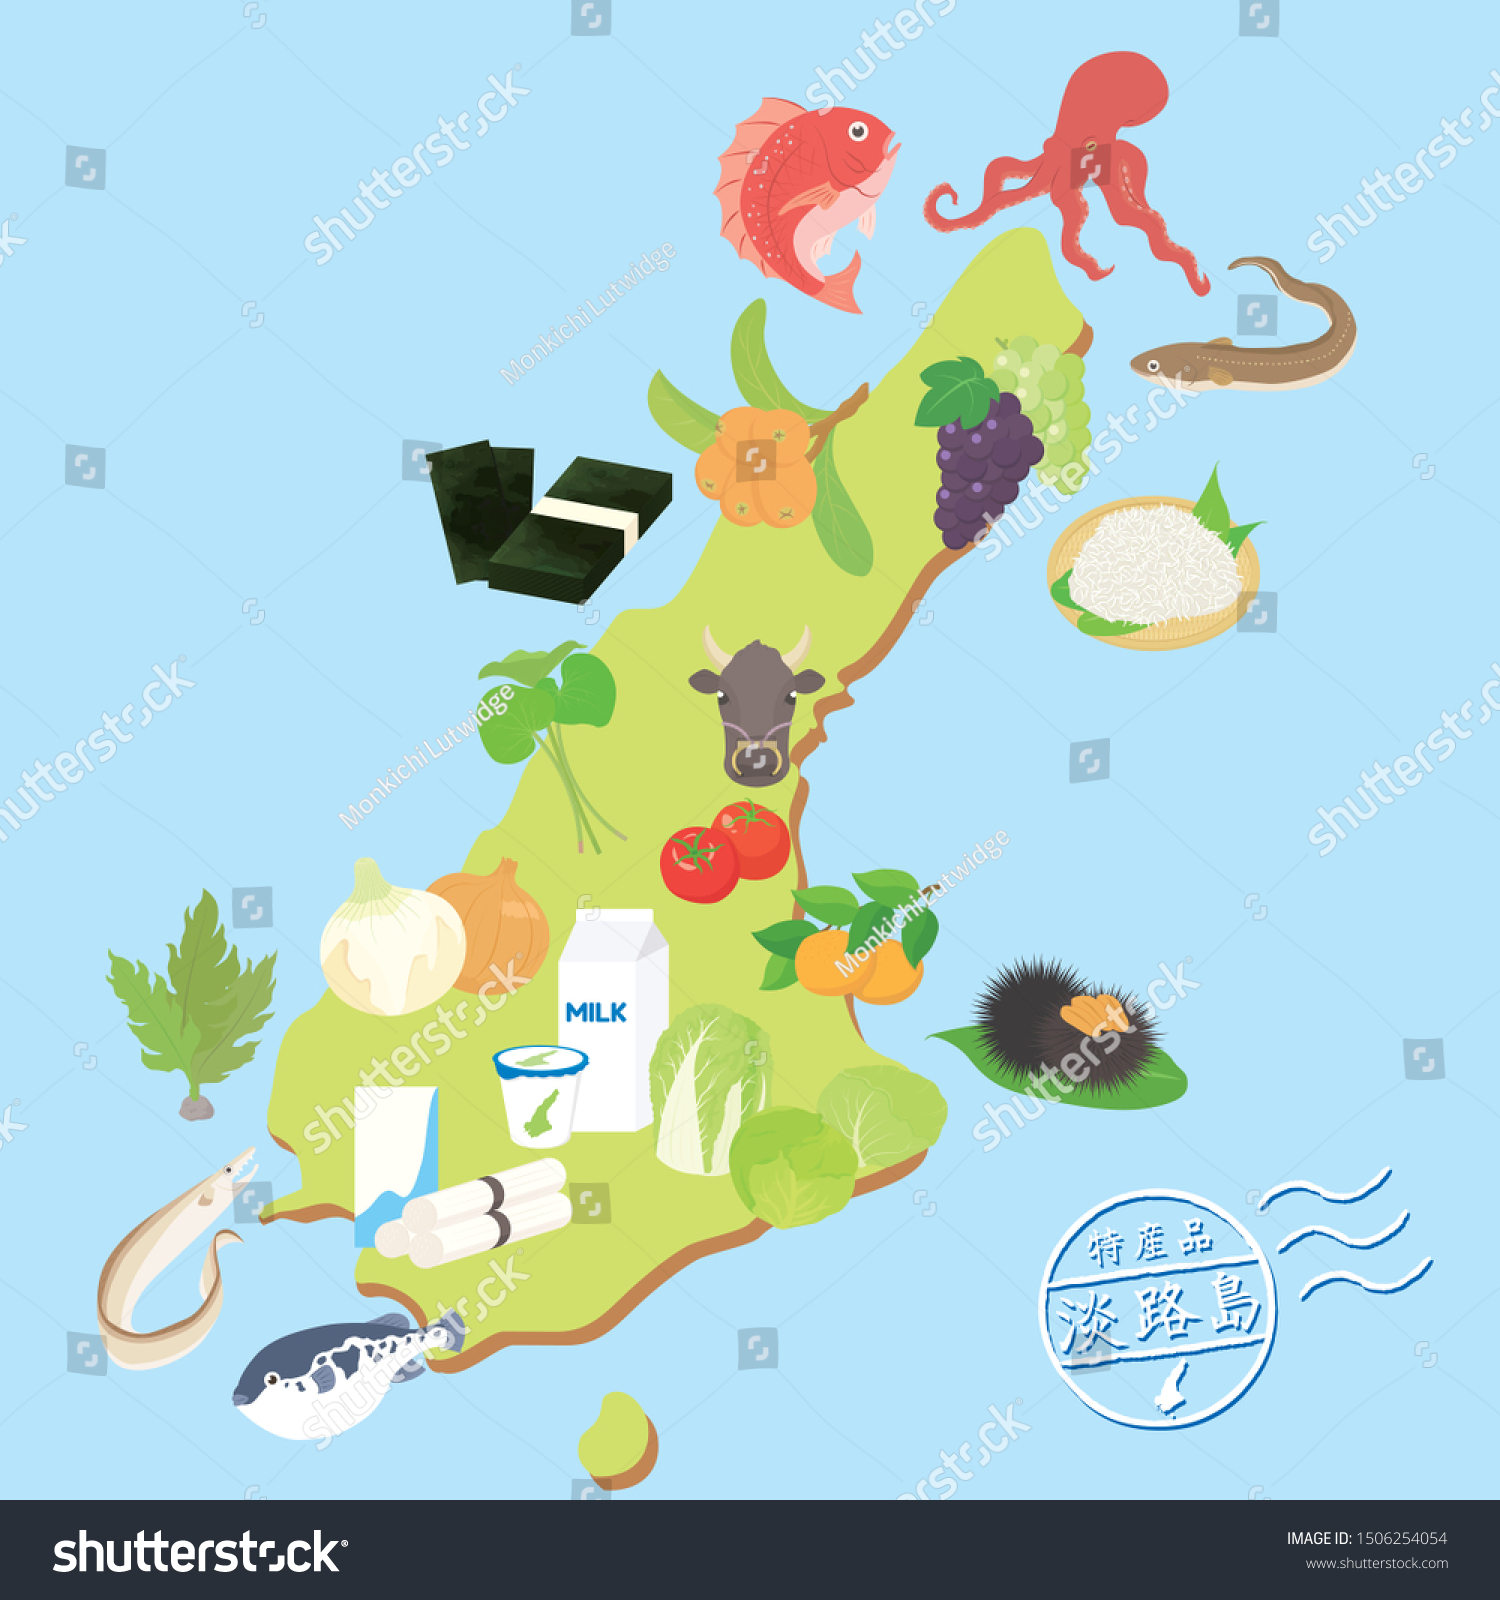 Stock Vector Special Product Map Of Awaji Island An Island In Hyogo Prefecture Japan Vector Illustration In 1506254054 